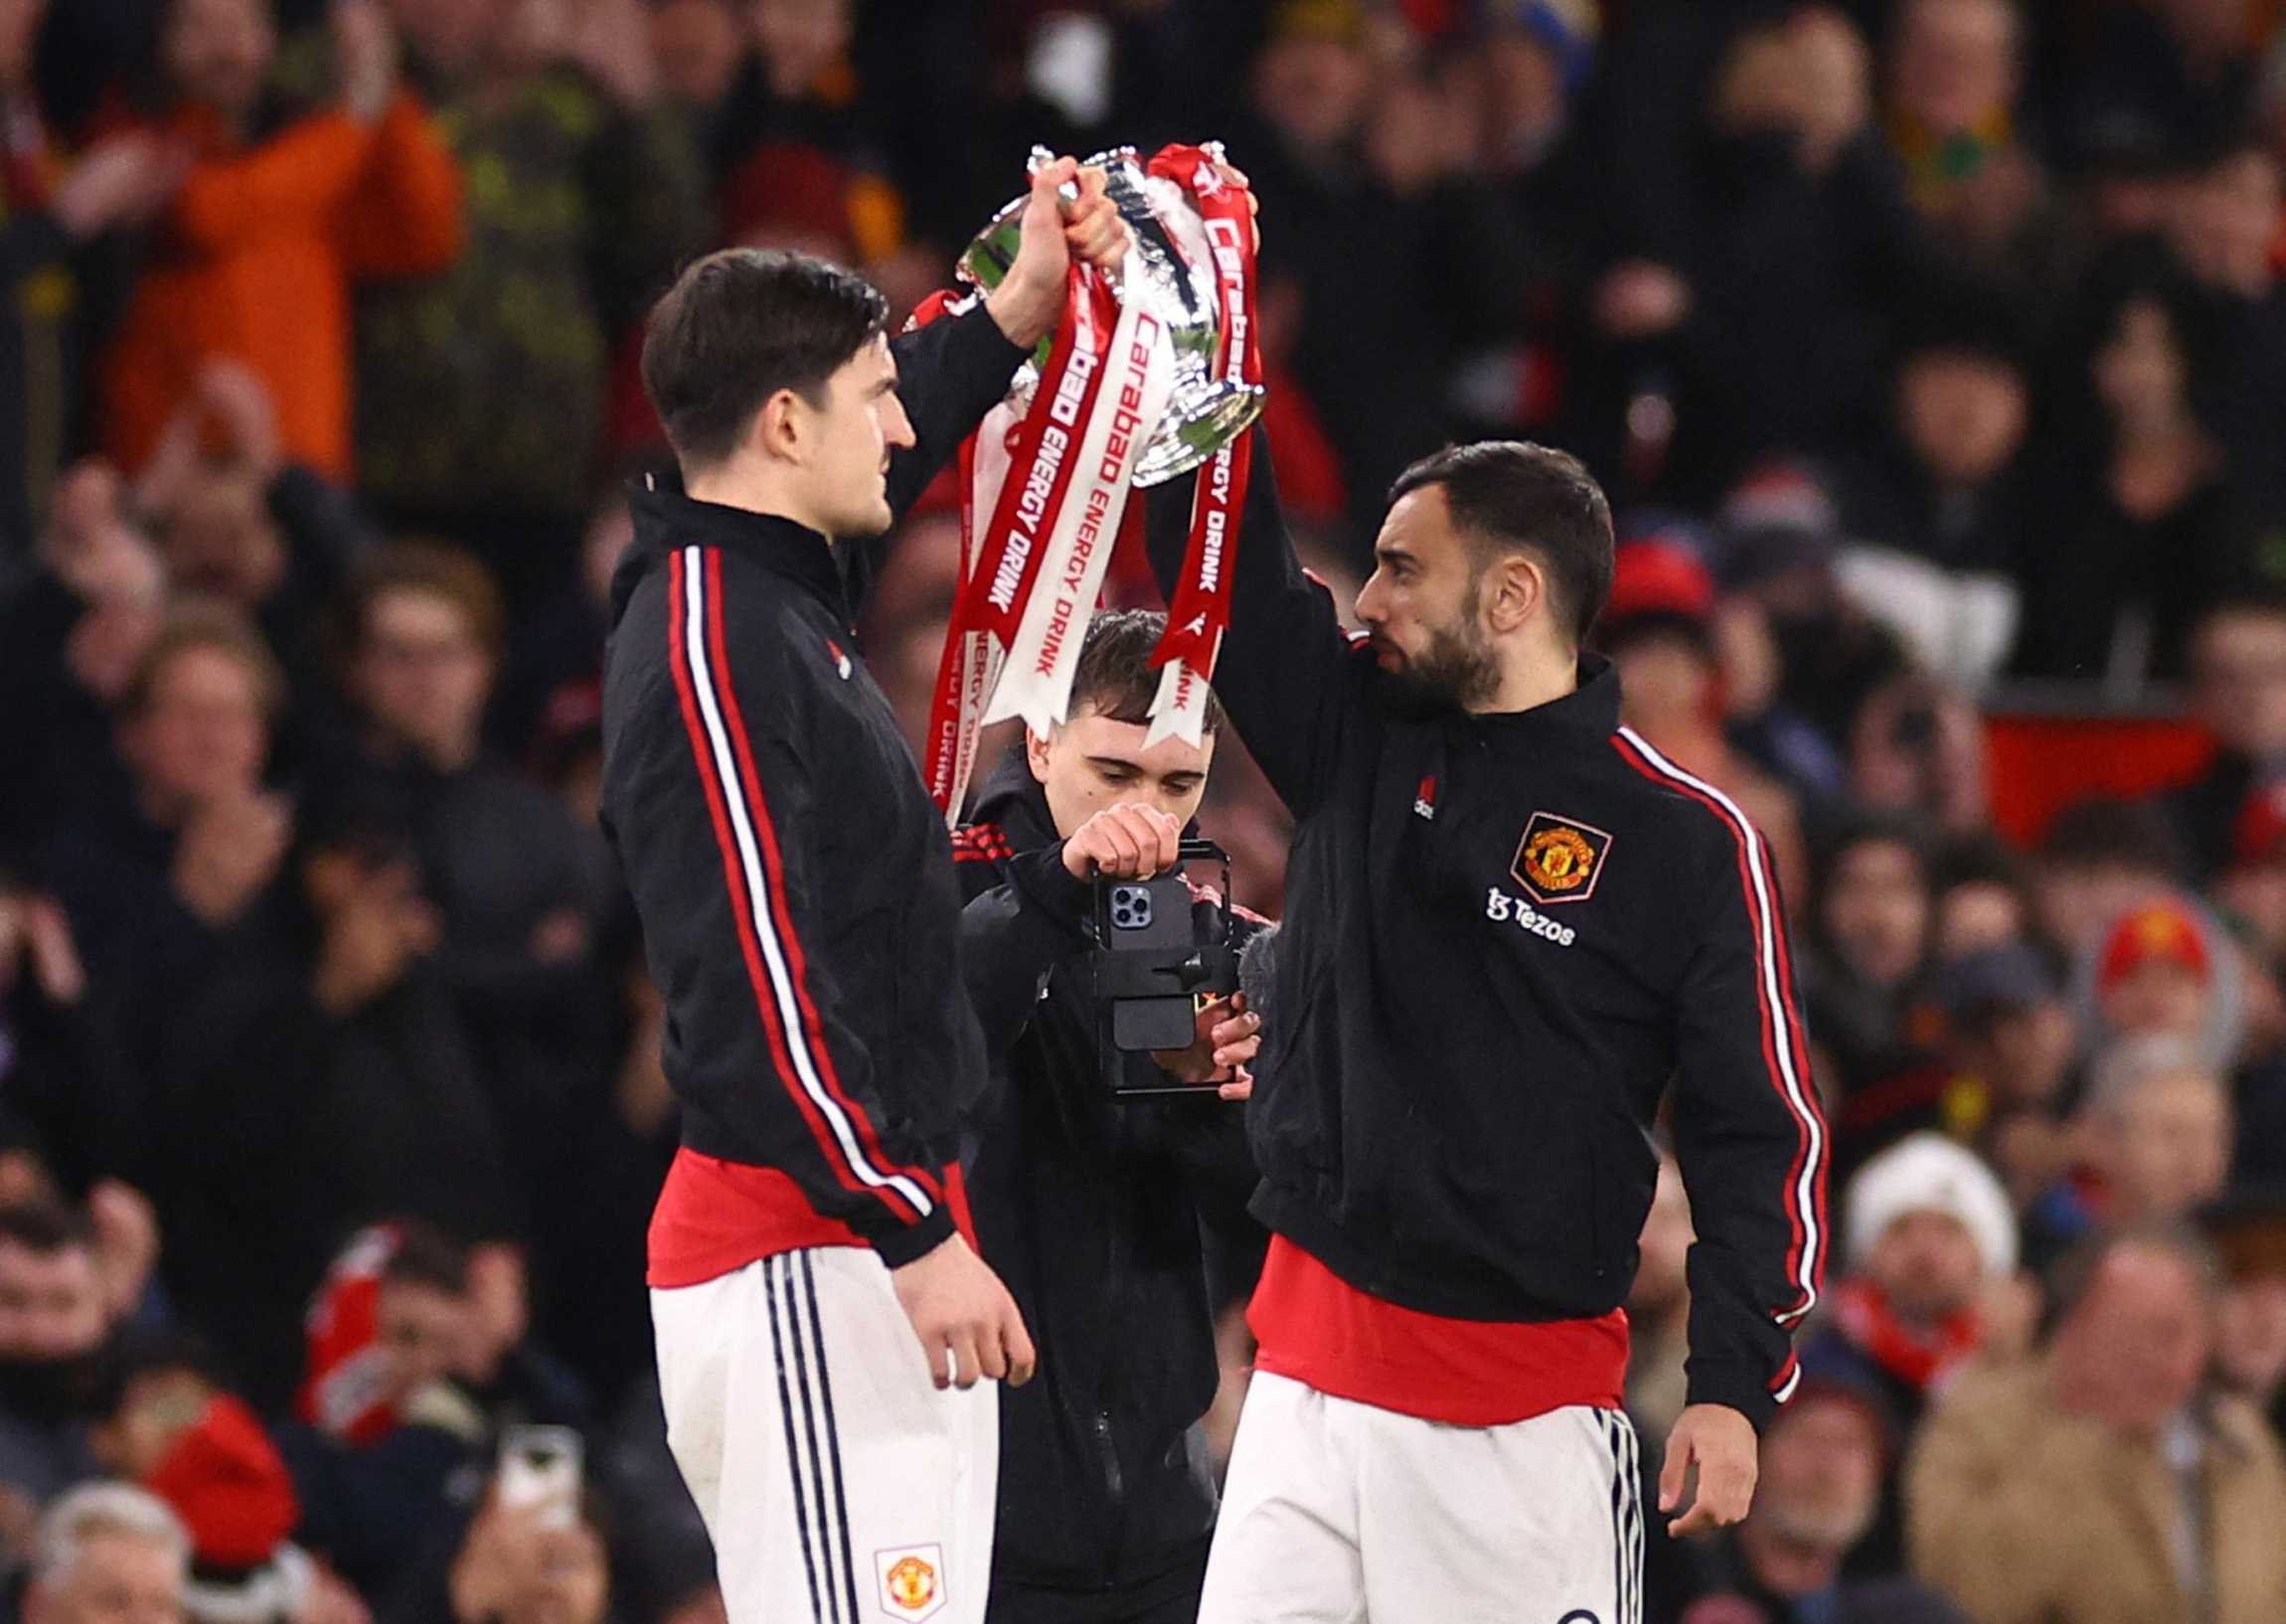 Manchester United's Harry Maguire and Bruno Fernandes with the Carabao Cup trophy before the match REUTERS/Carl Recine